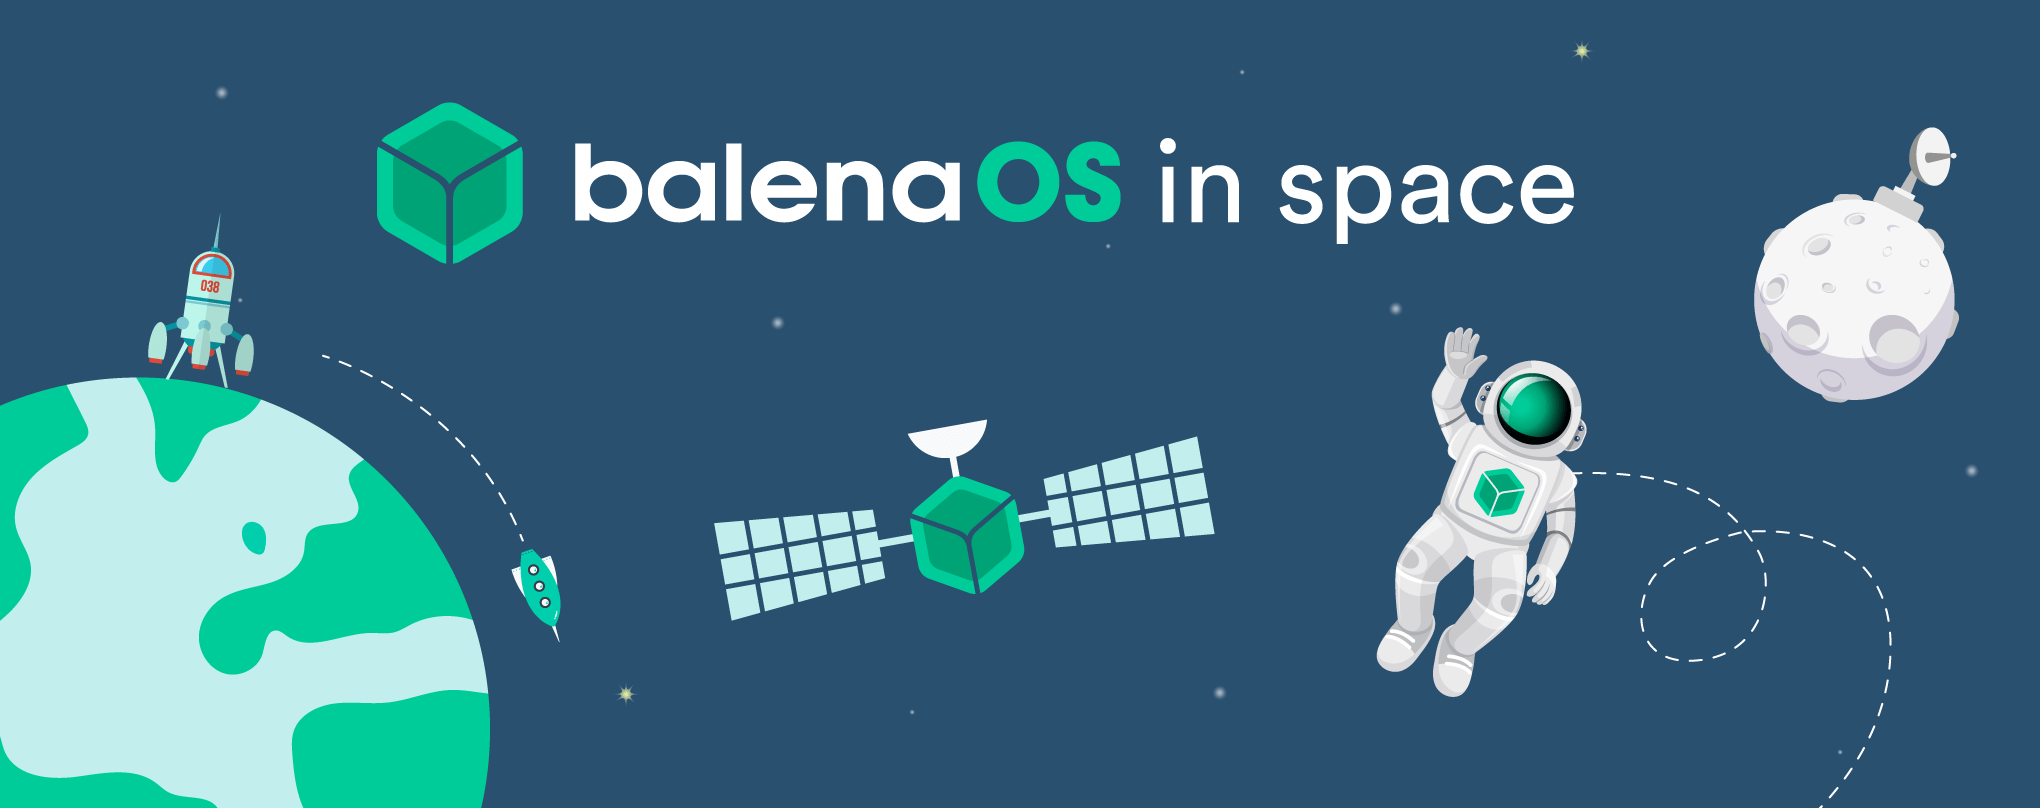 Beyond the cloud: Docker containers in space